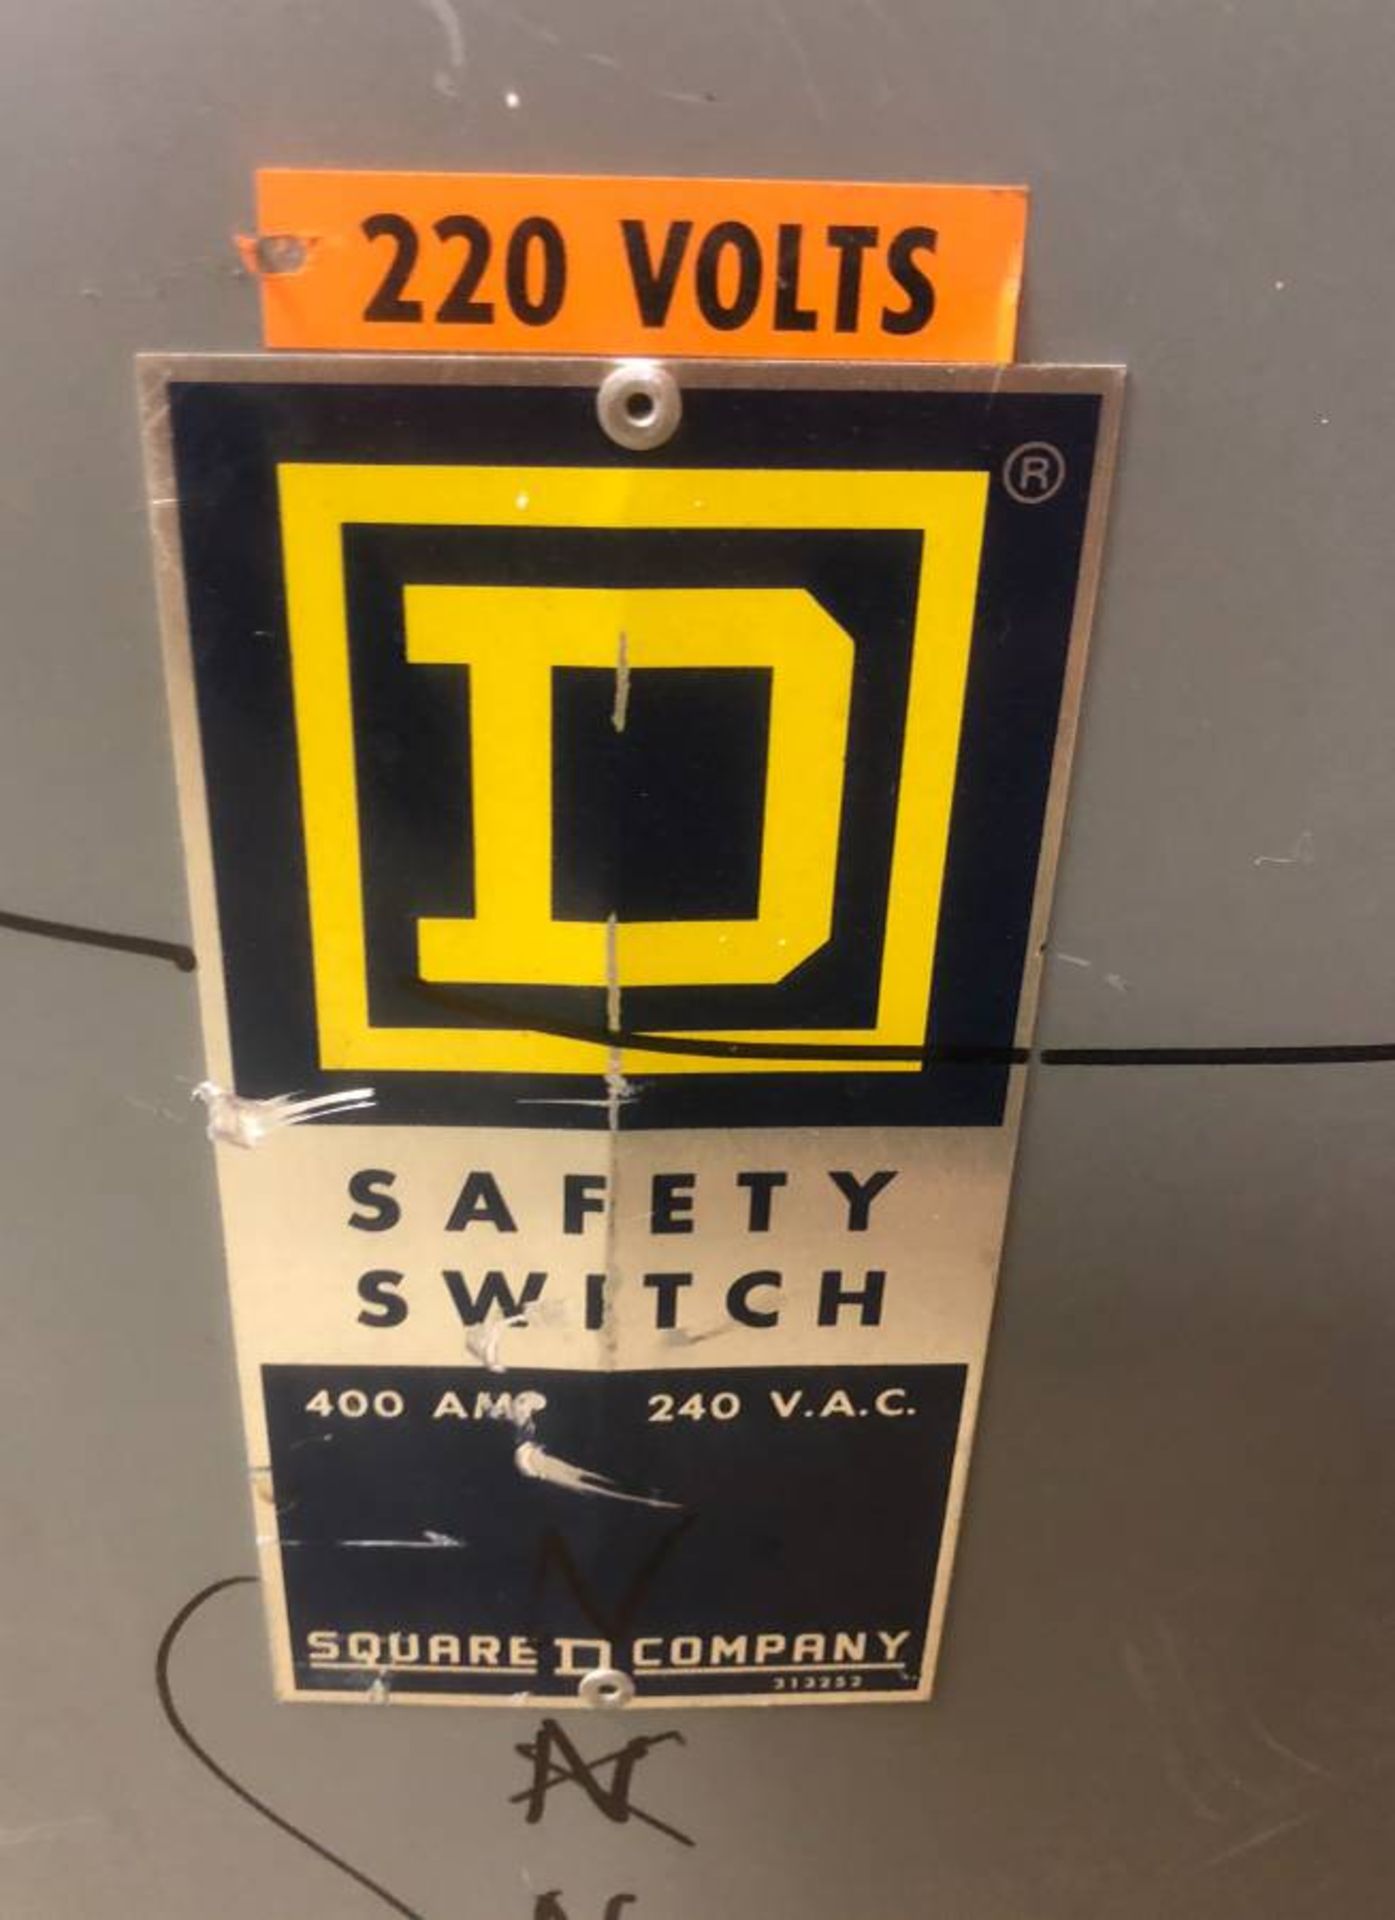 Square D D225N GD Safety Switch 400A 240V FUSIBLE $1400 unit - Image 3 of 5